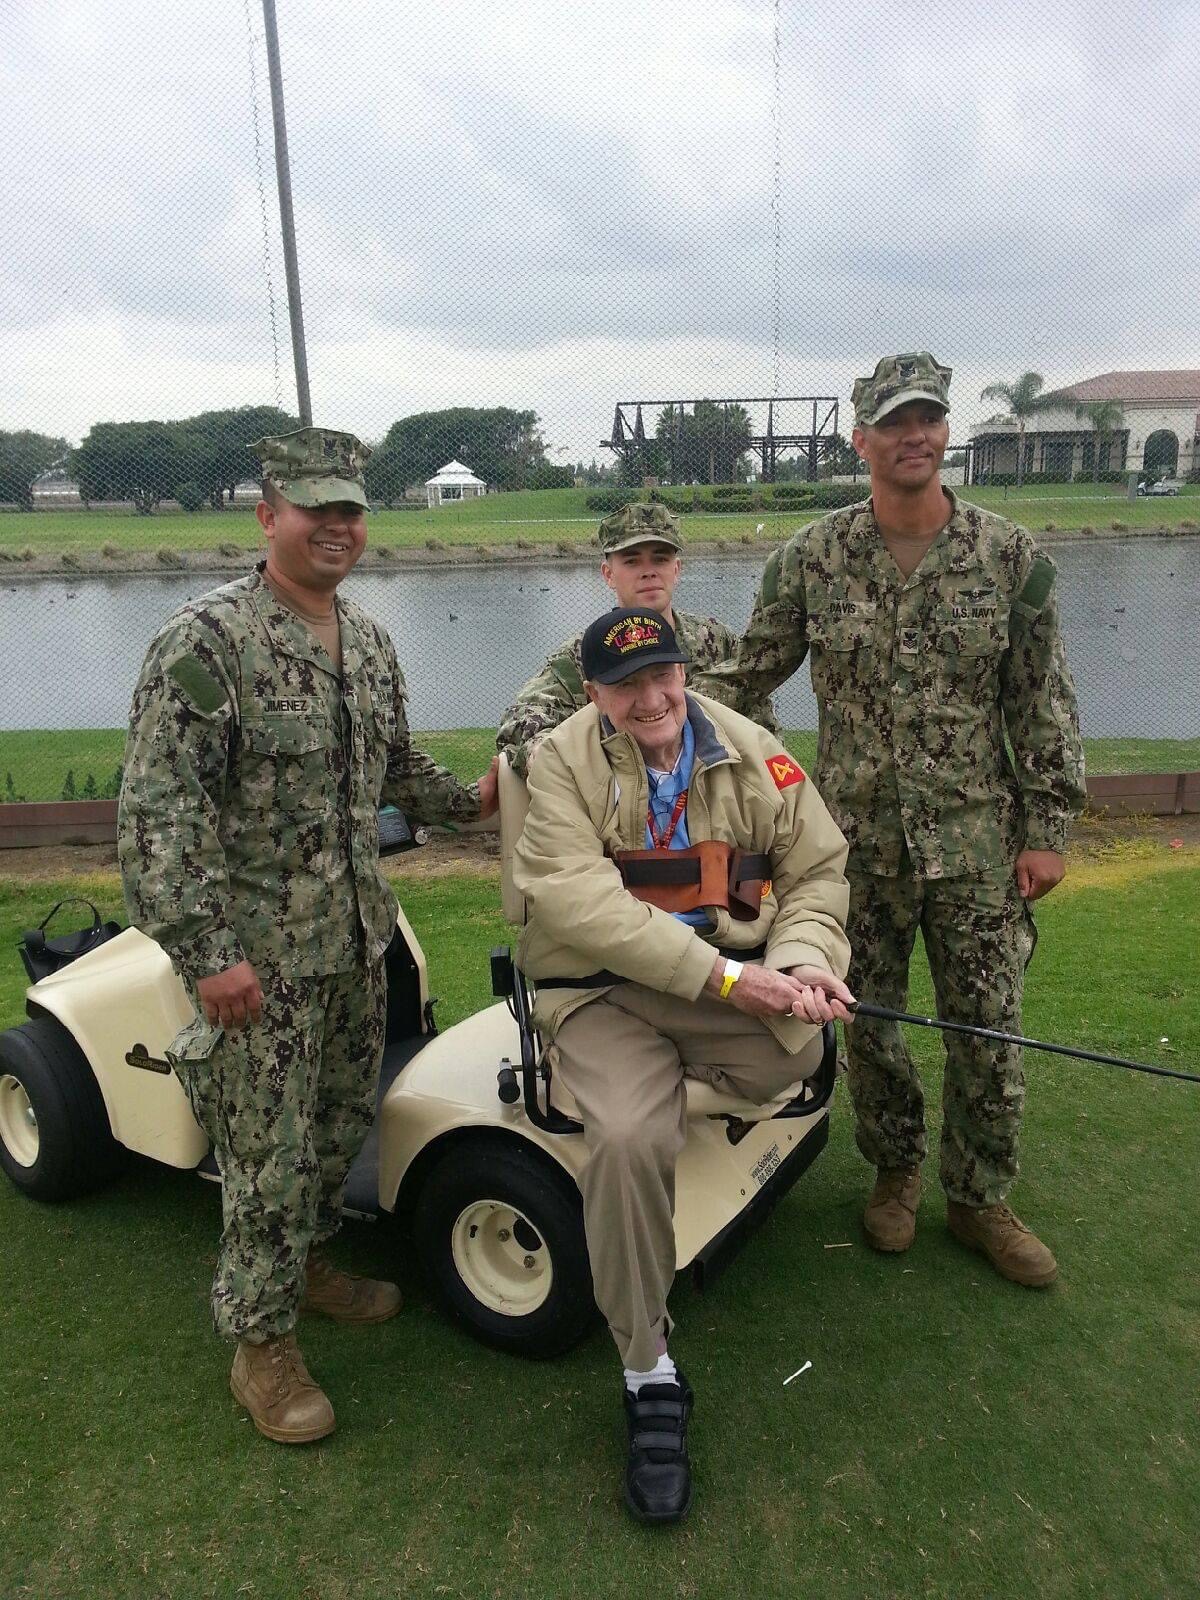 Tom with his fellow Marines!